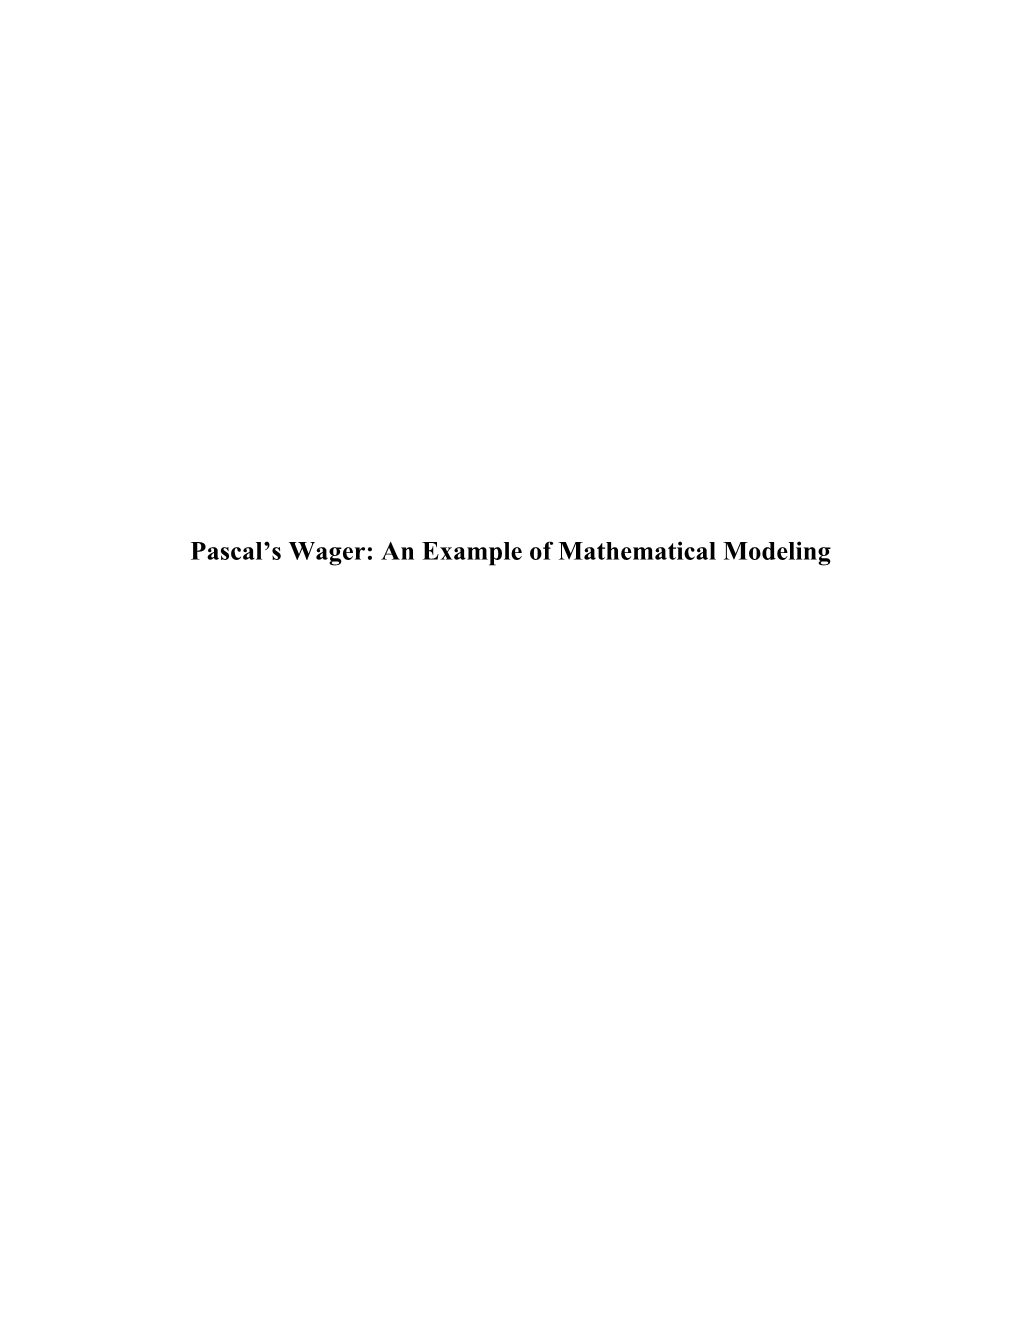 Pascal S Wager: an Example of Mathematical Modeling